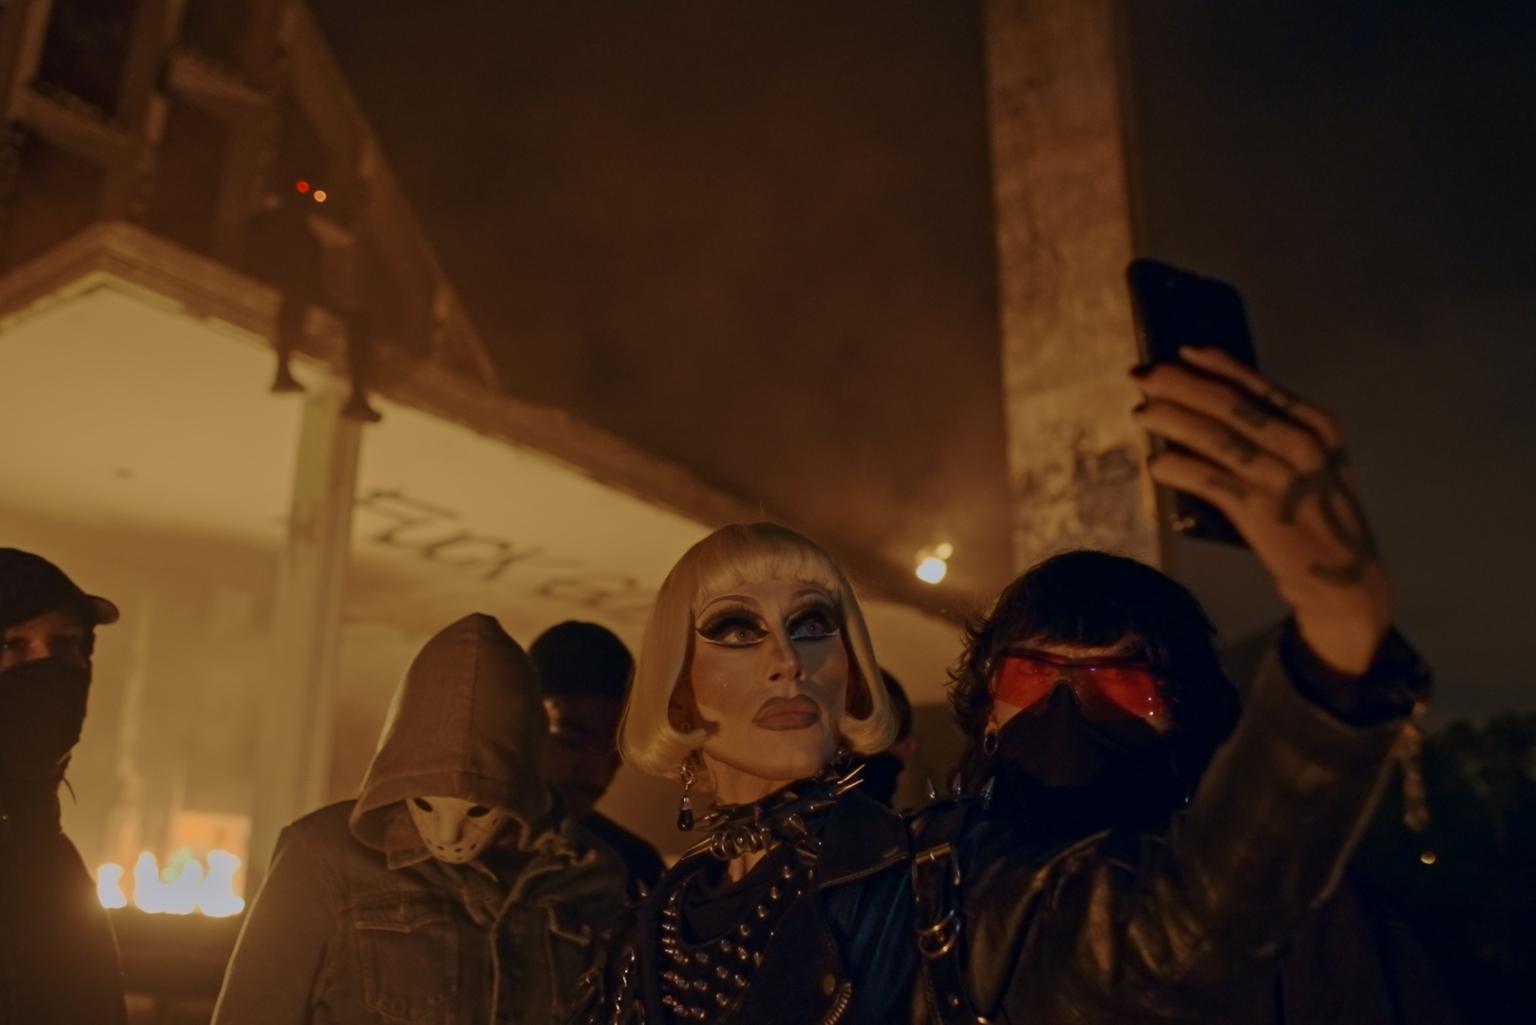 In the center you can see a heavily made-up person with striking facial features. She wears a white-blond wig with a bob cut and black patent clothing. She is taking a selfie with a serious expression. To her left and right are people wearing face masks and hoods. Everything looks a little sinister, but also rebellious and powerful.